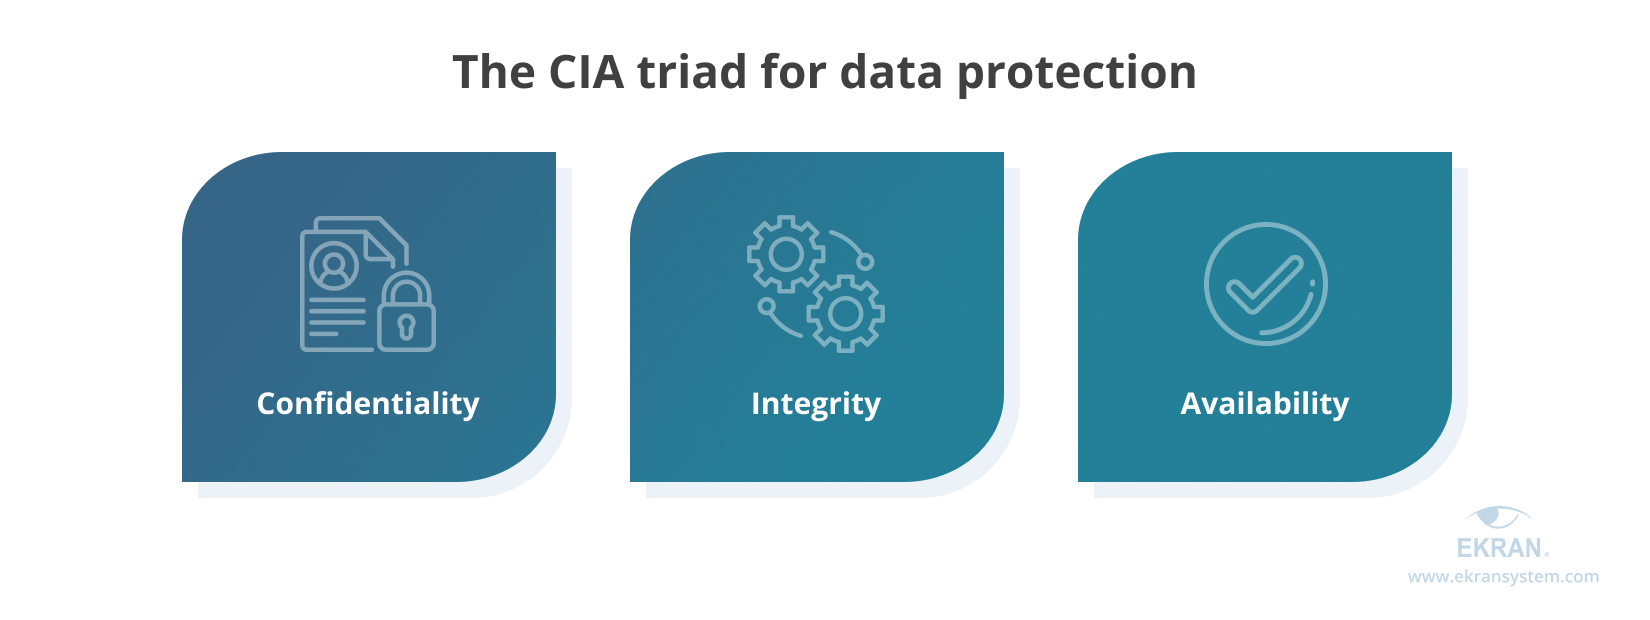 The CIA triad for data protection